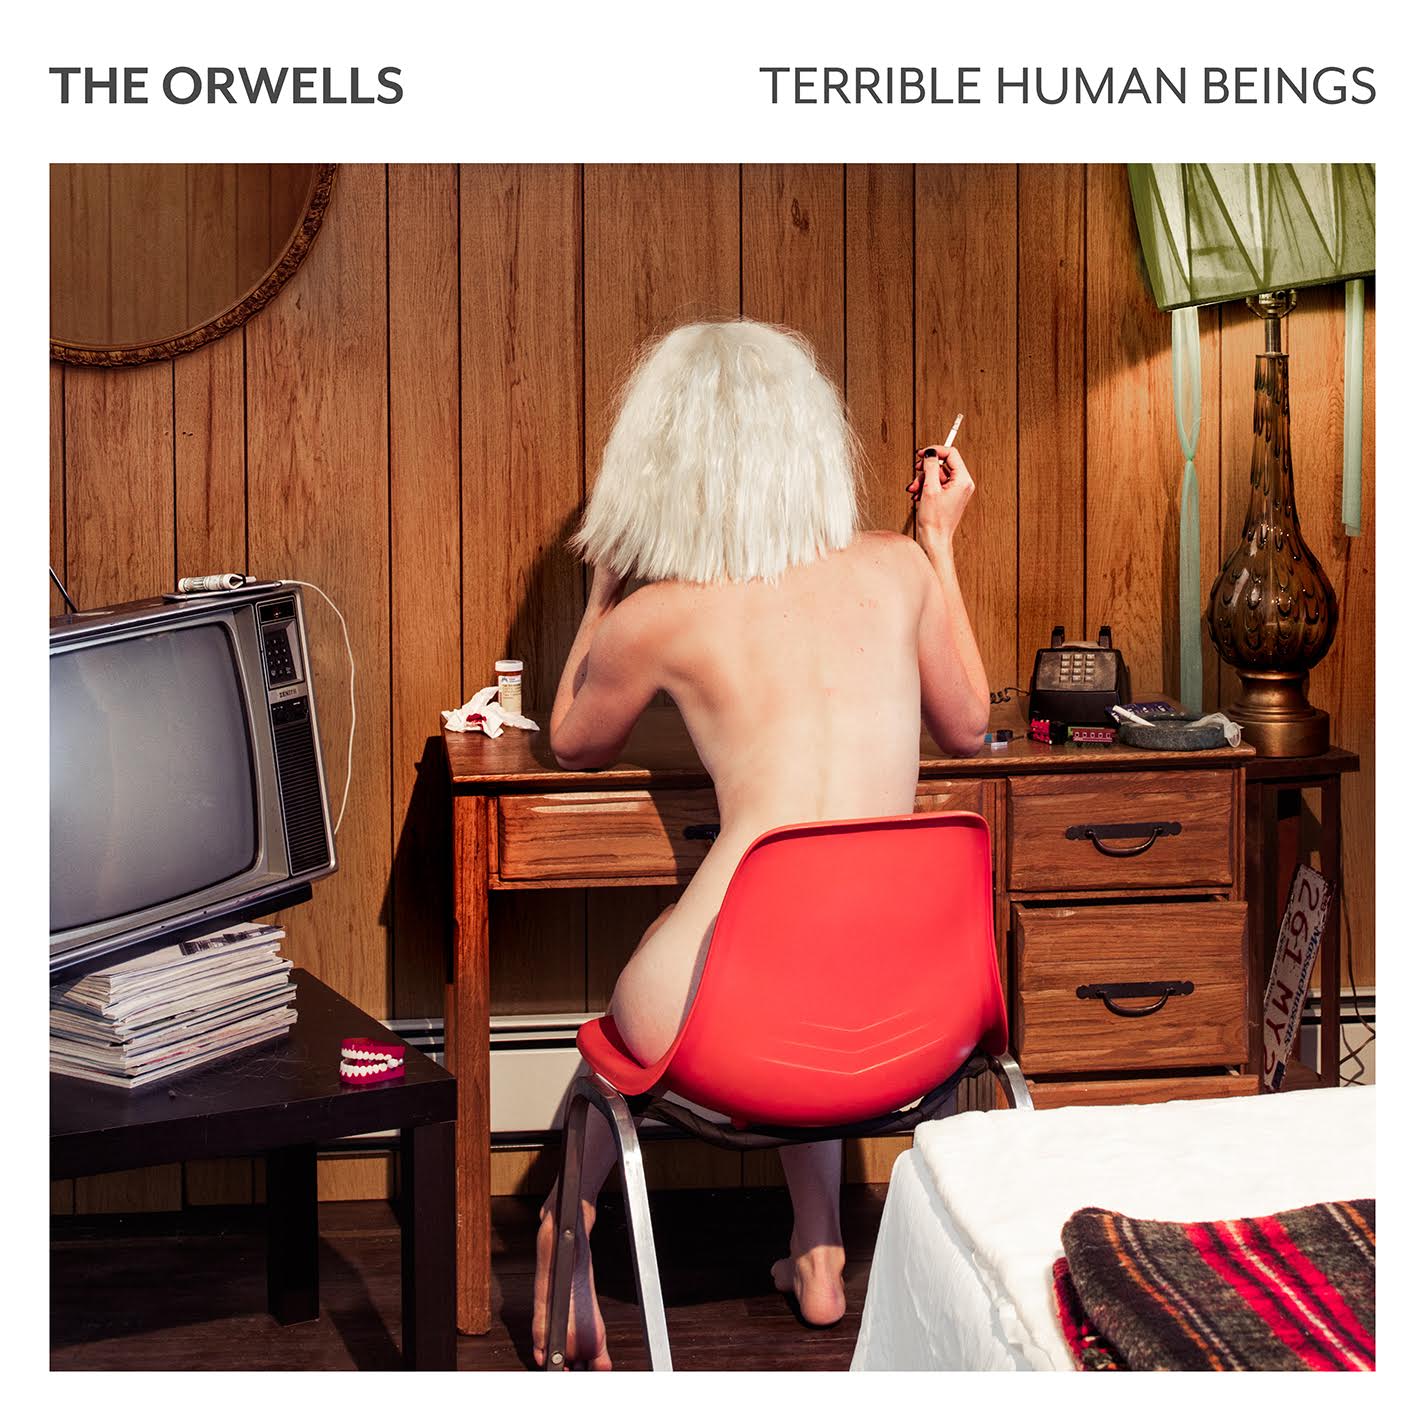 The Orwells Are Moving Past Growing Pains on <em></noscript>Terrible Human Beings</em>” title=”unnamed-1″ data-original-id=”213719″ data-adjusted-id=”213719″ class=”sm_size_full_width sm_alignment_center ” /></p>
<p>The 13-track collection finds the band trying out some new territory, focusing a little less on the danceable, buoyant guitar rhythms of their first two albums to make room for “weird drum-loop experimentations, a lot of backward stuff, and different vocal techniques,” according to O’Keefe.</p>
<p>This time around, the Orwells are fancying themselves craftsmen. Yes, they’re still in their early twenties, but they’re more interested in moving forward than simply getting loused on the same tales of knocking back beers with friends and spending wild nights with strangers.</p>
<p>“I have a slightly different view in the short span of a year or two,” Cuomo says. “It pushes [you] more as an artist … You can’t get away with as much—and I don’t think we want to, either.”</p>
</p></p>    <div class=